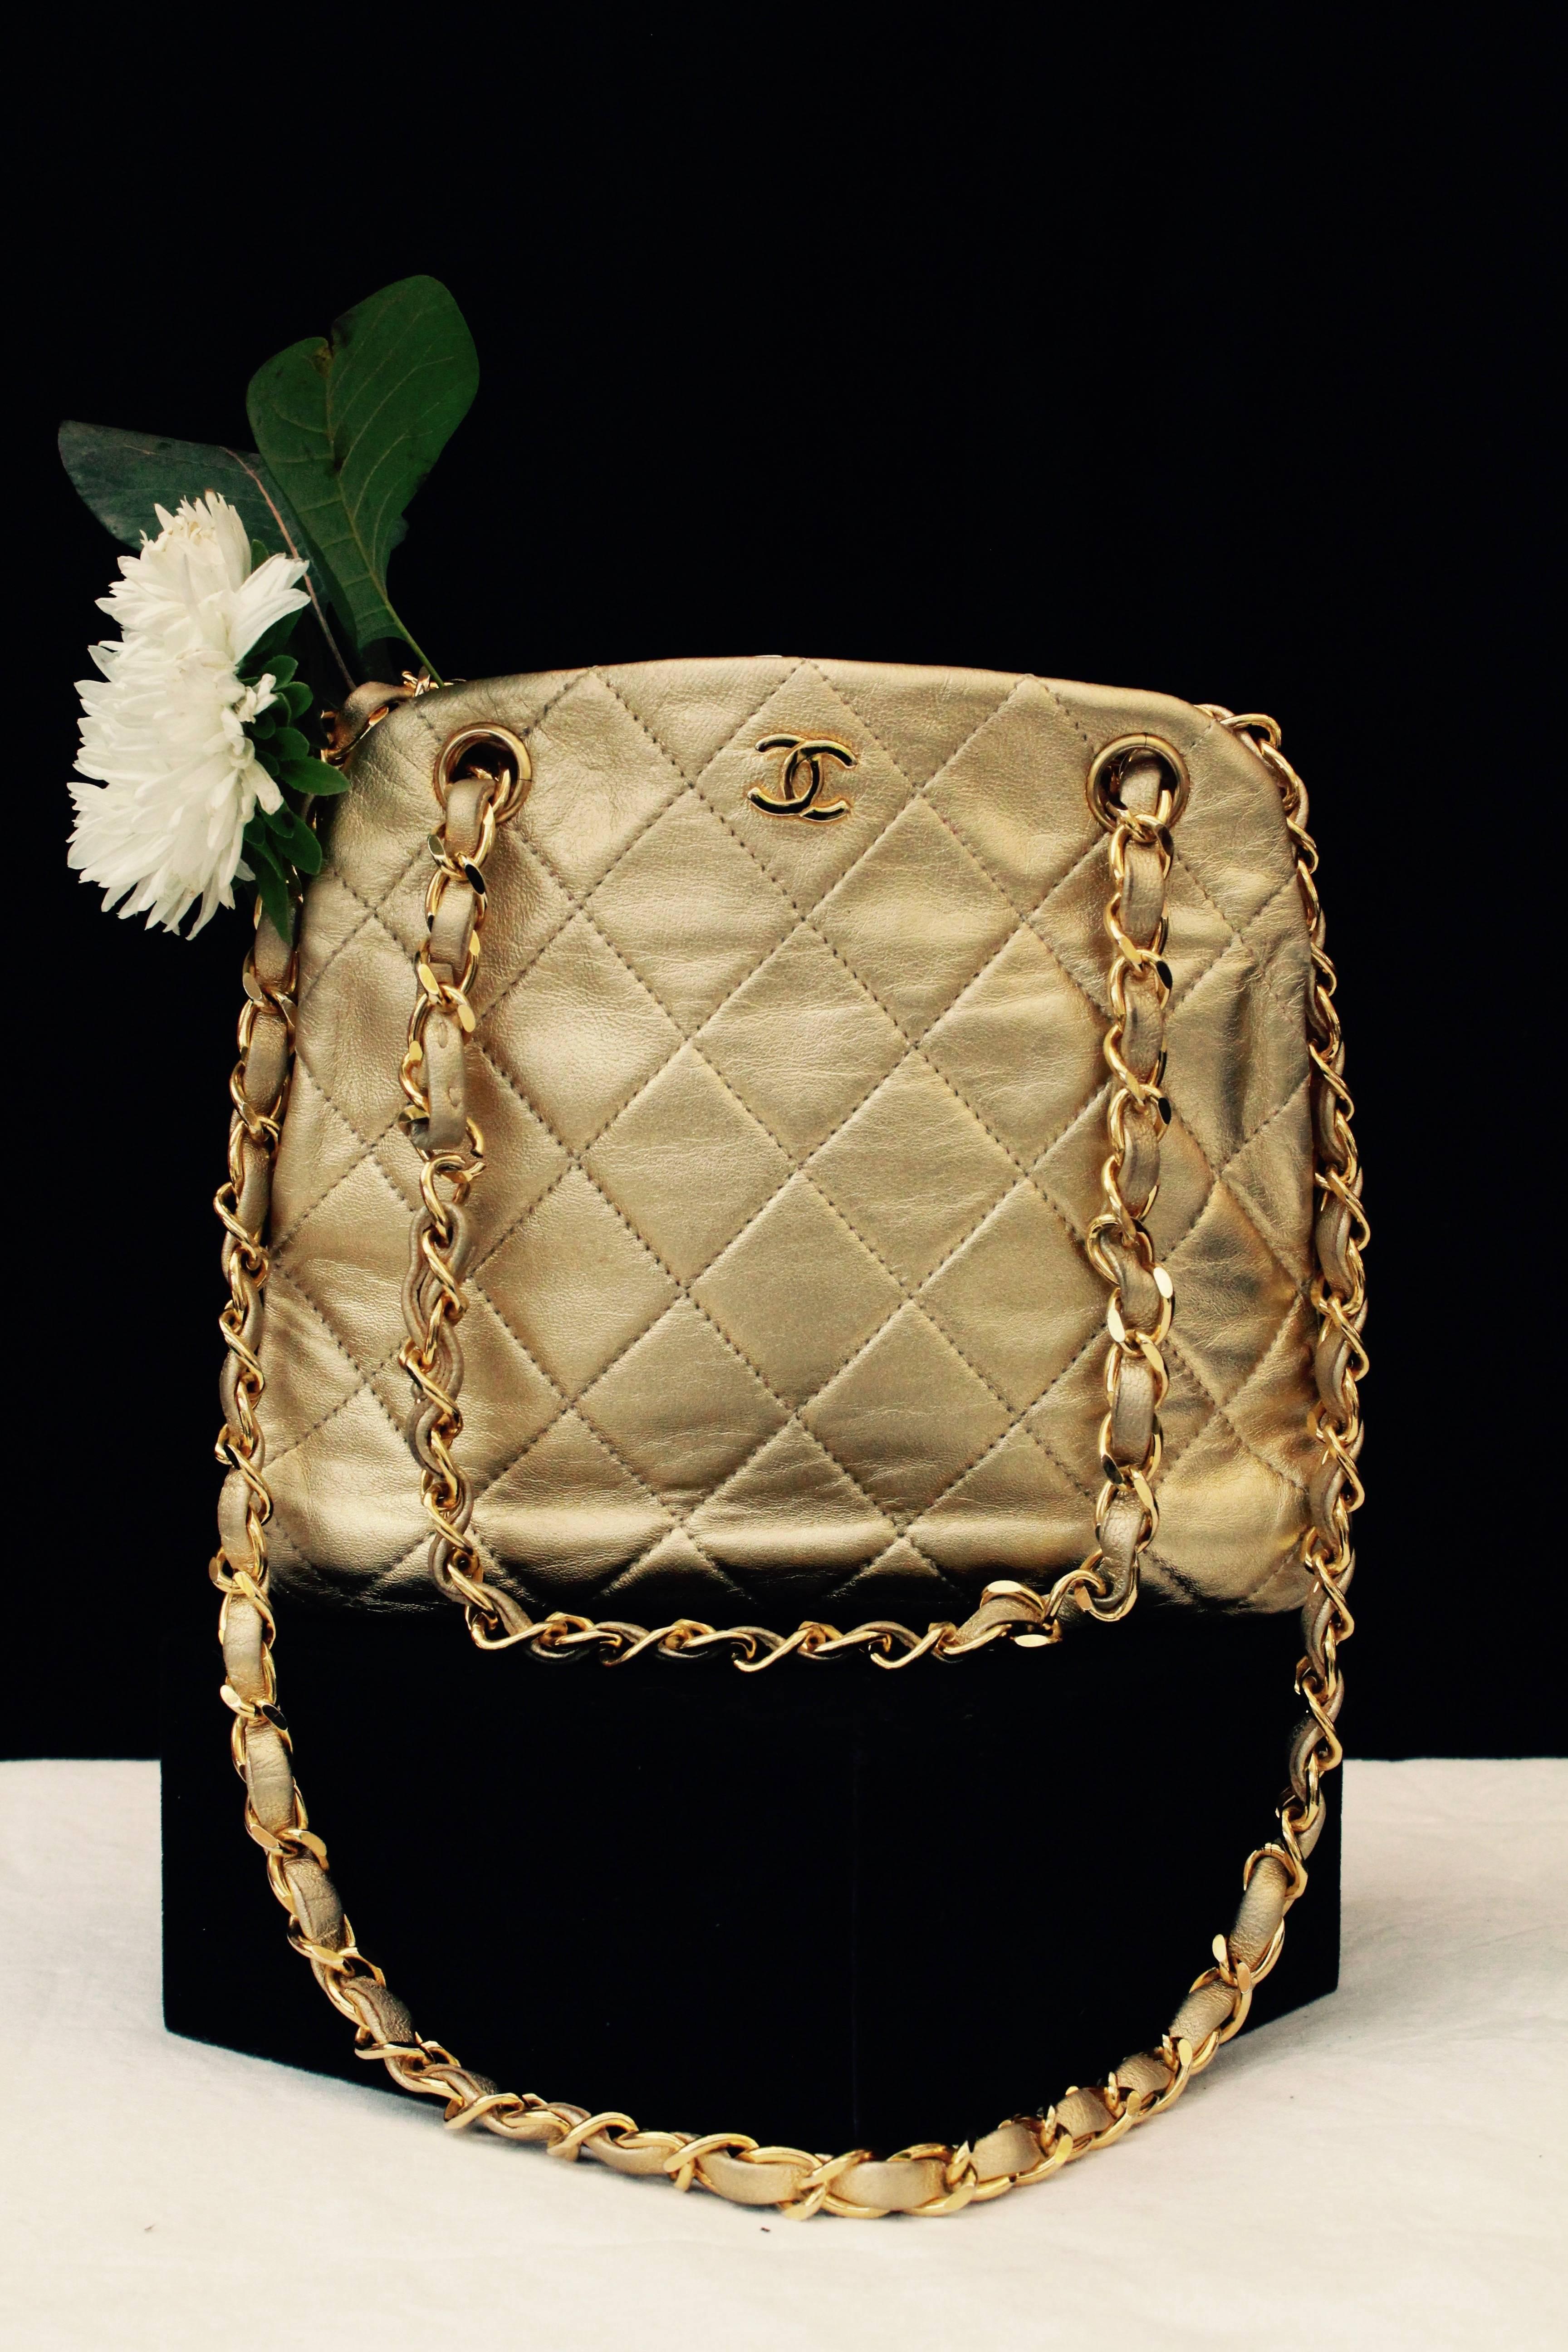 CHANEL (Made in France) Small vintage golden leather bag quilted with thin over stitching. Two small gilded metal straps entwined with golden leather. Gilded metal purse clasp. Golden lining with stamped signature in gold letters.

Serial number